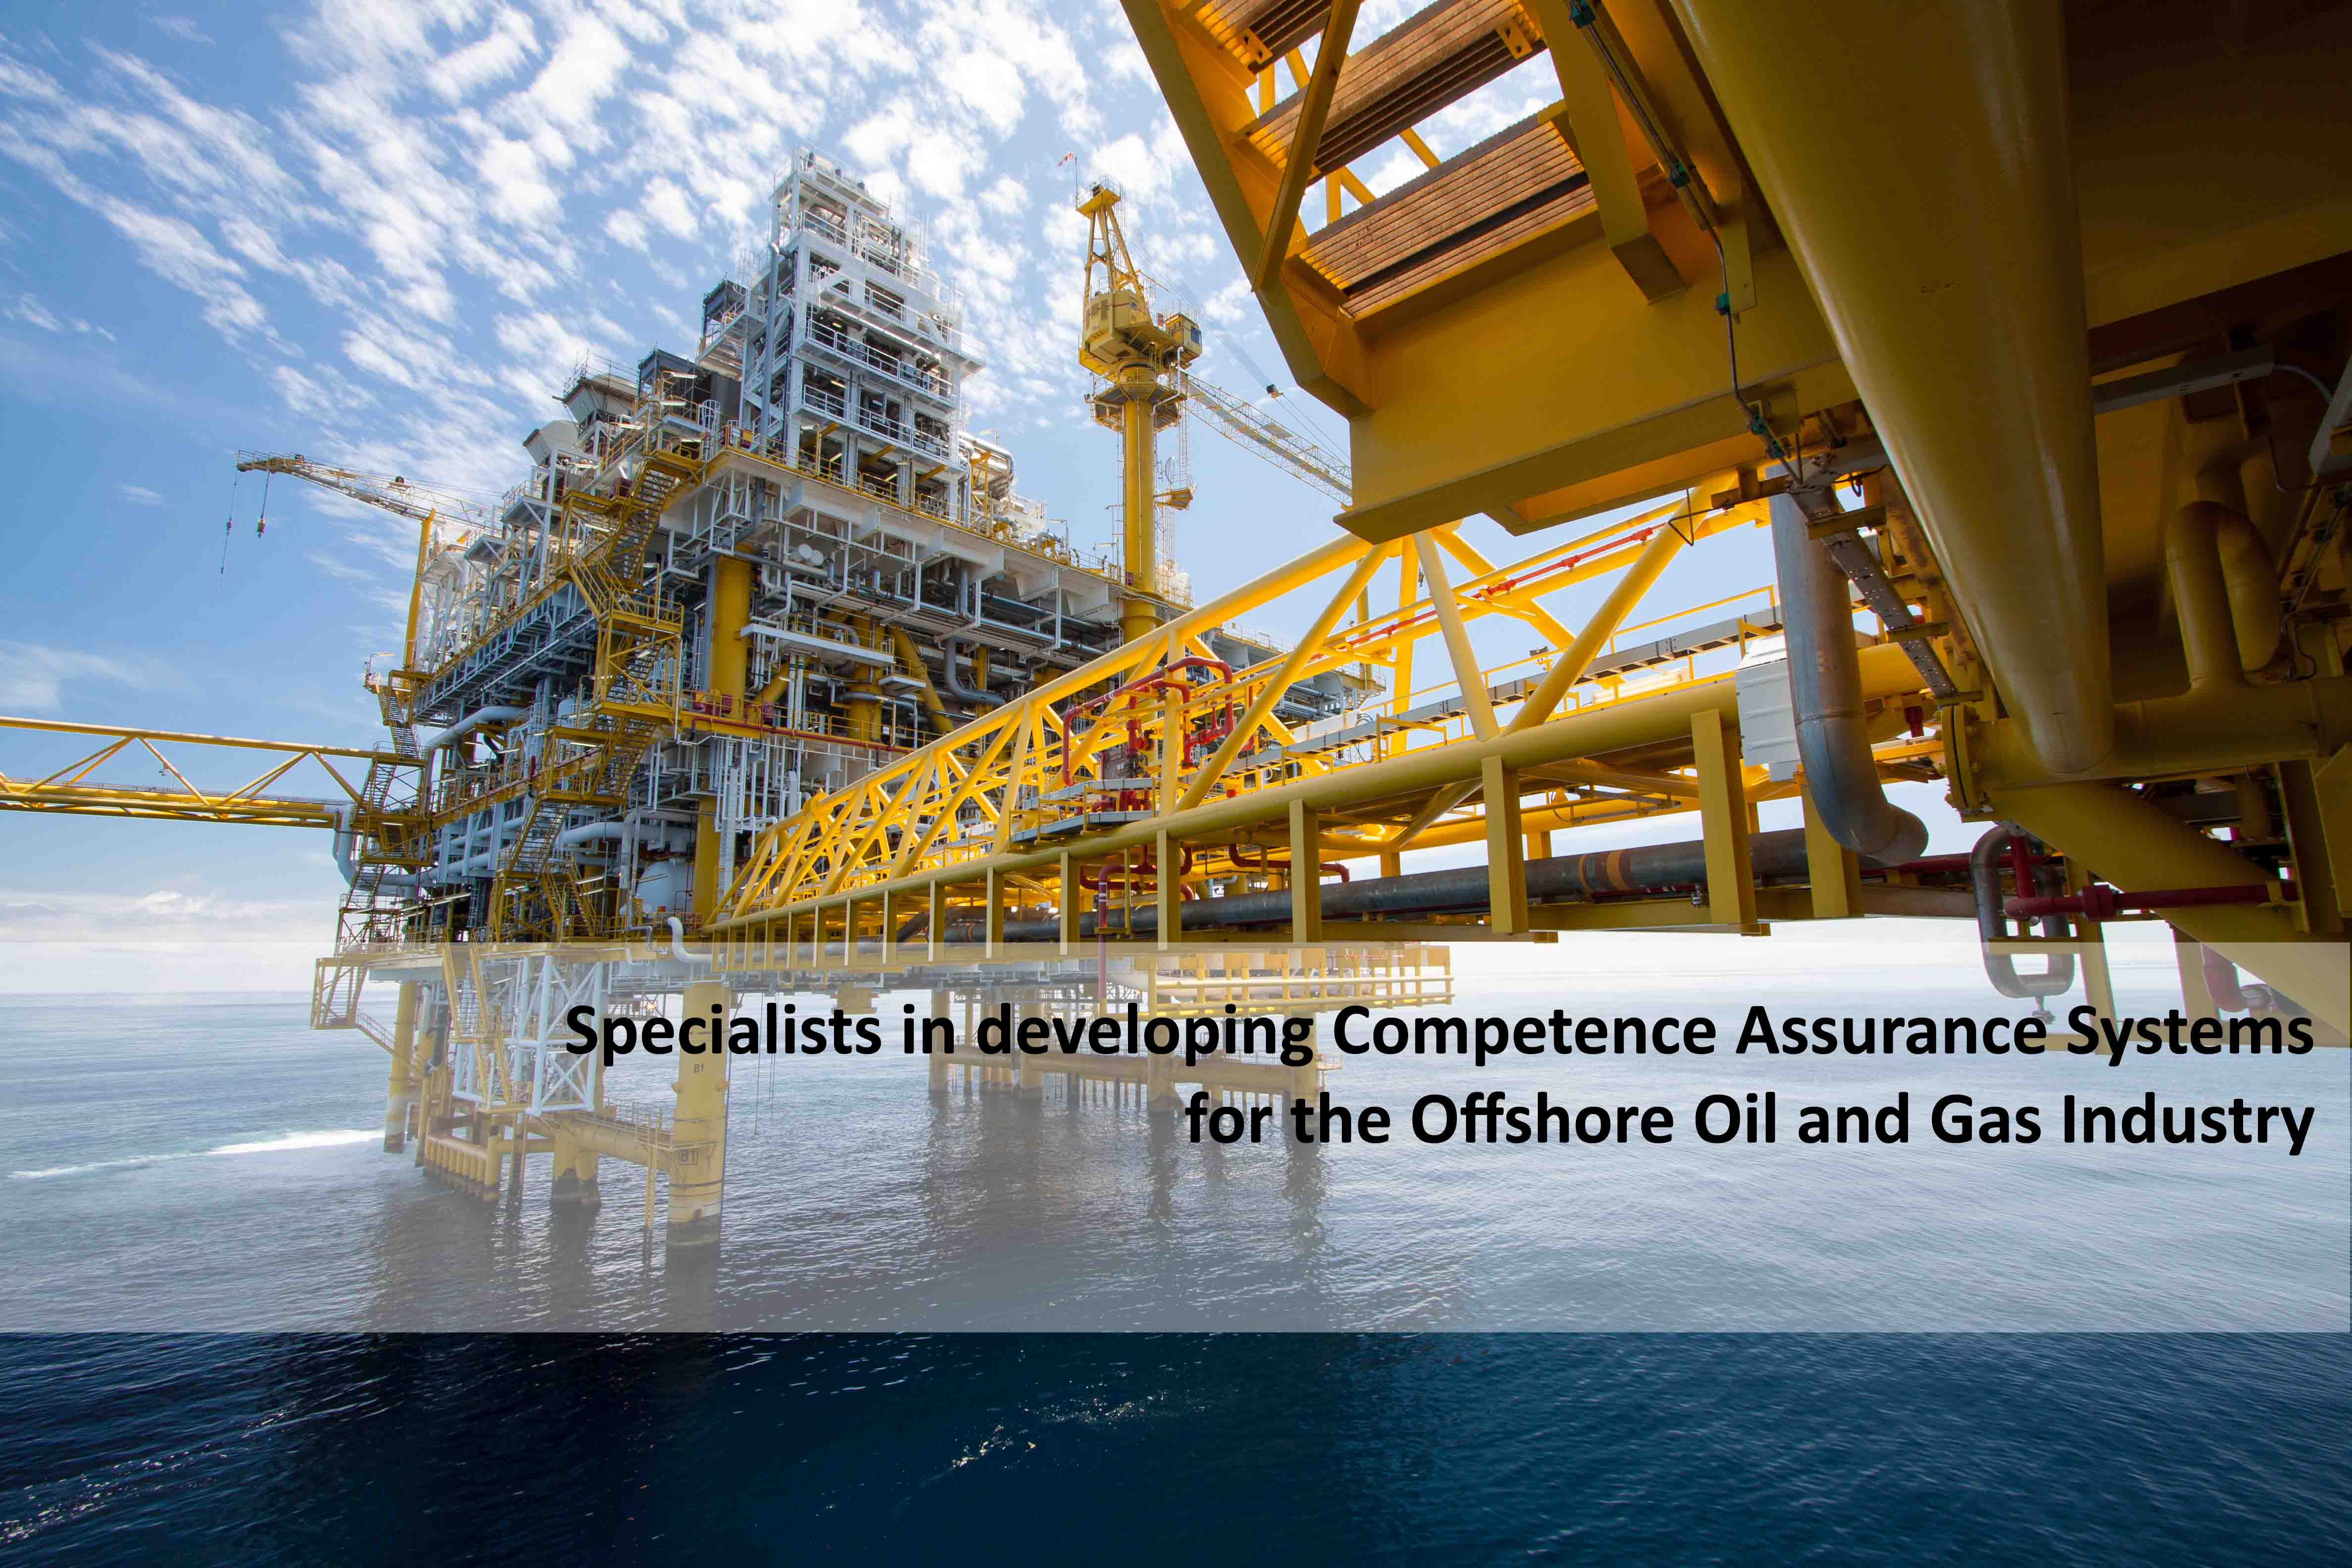 IDESS IT are specialists in developing Competence Assurance Systems for the offshore oil and gas industry